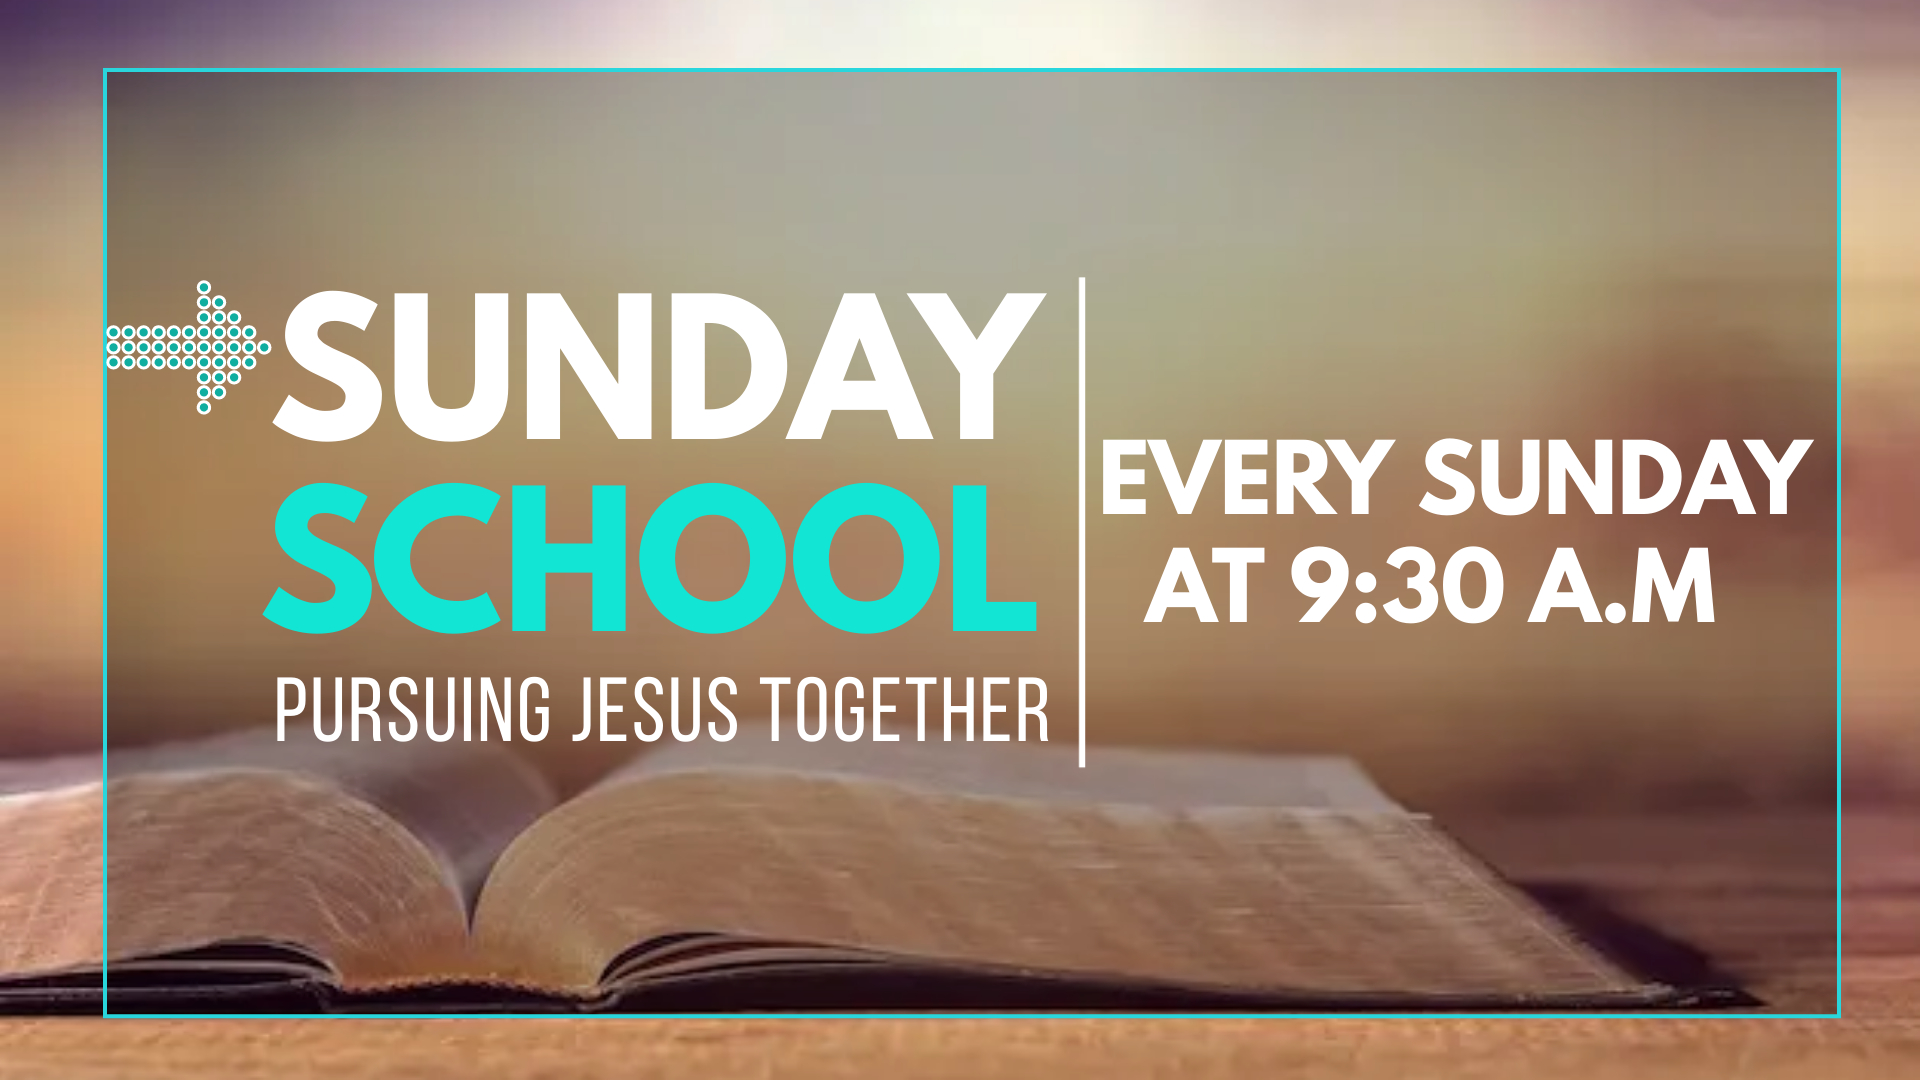 Join us for Sunday School